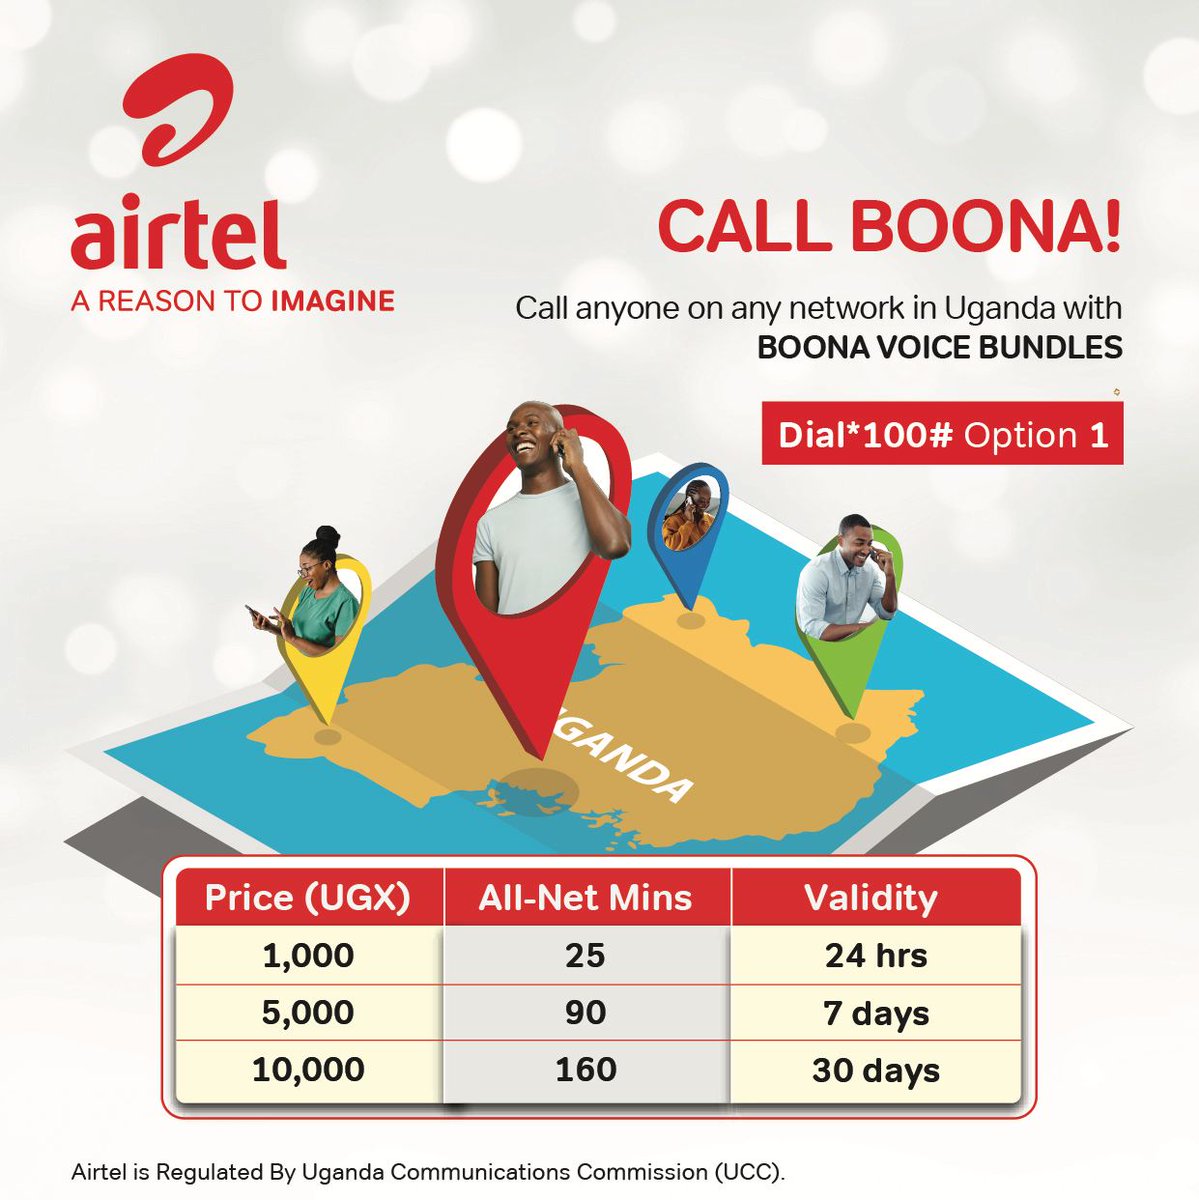 Dial *100# option 1 to start enjoying hassle-free calls. Stay connected with loved ones across all networks effortlessly. #CallBoona